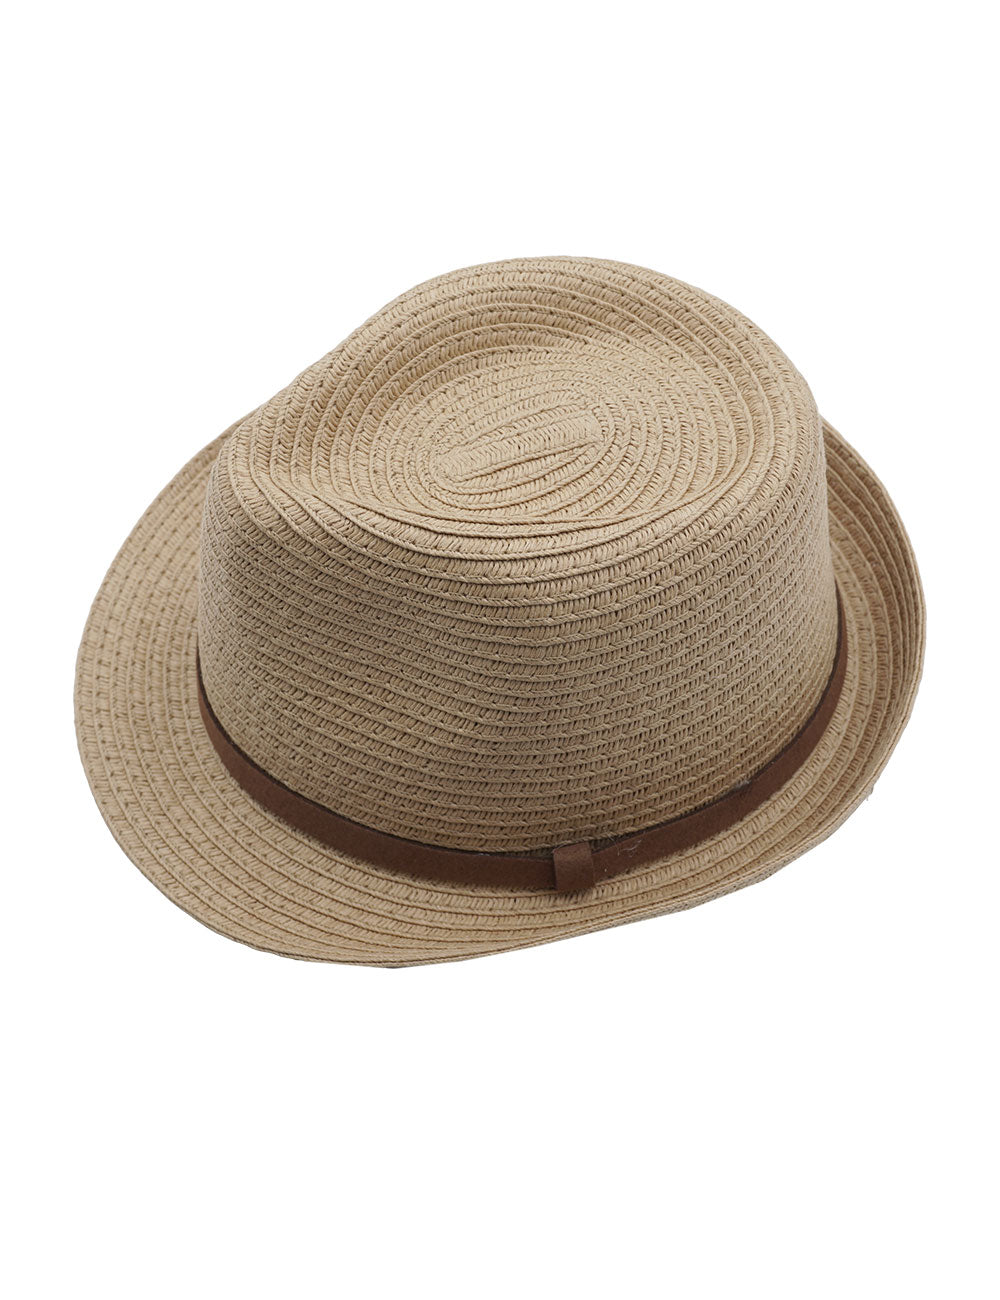 Maximo - Trilby Children's Hat - Brown